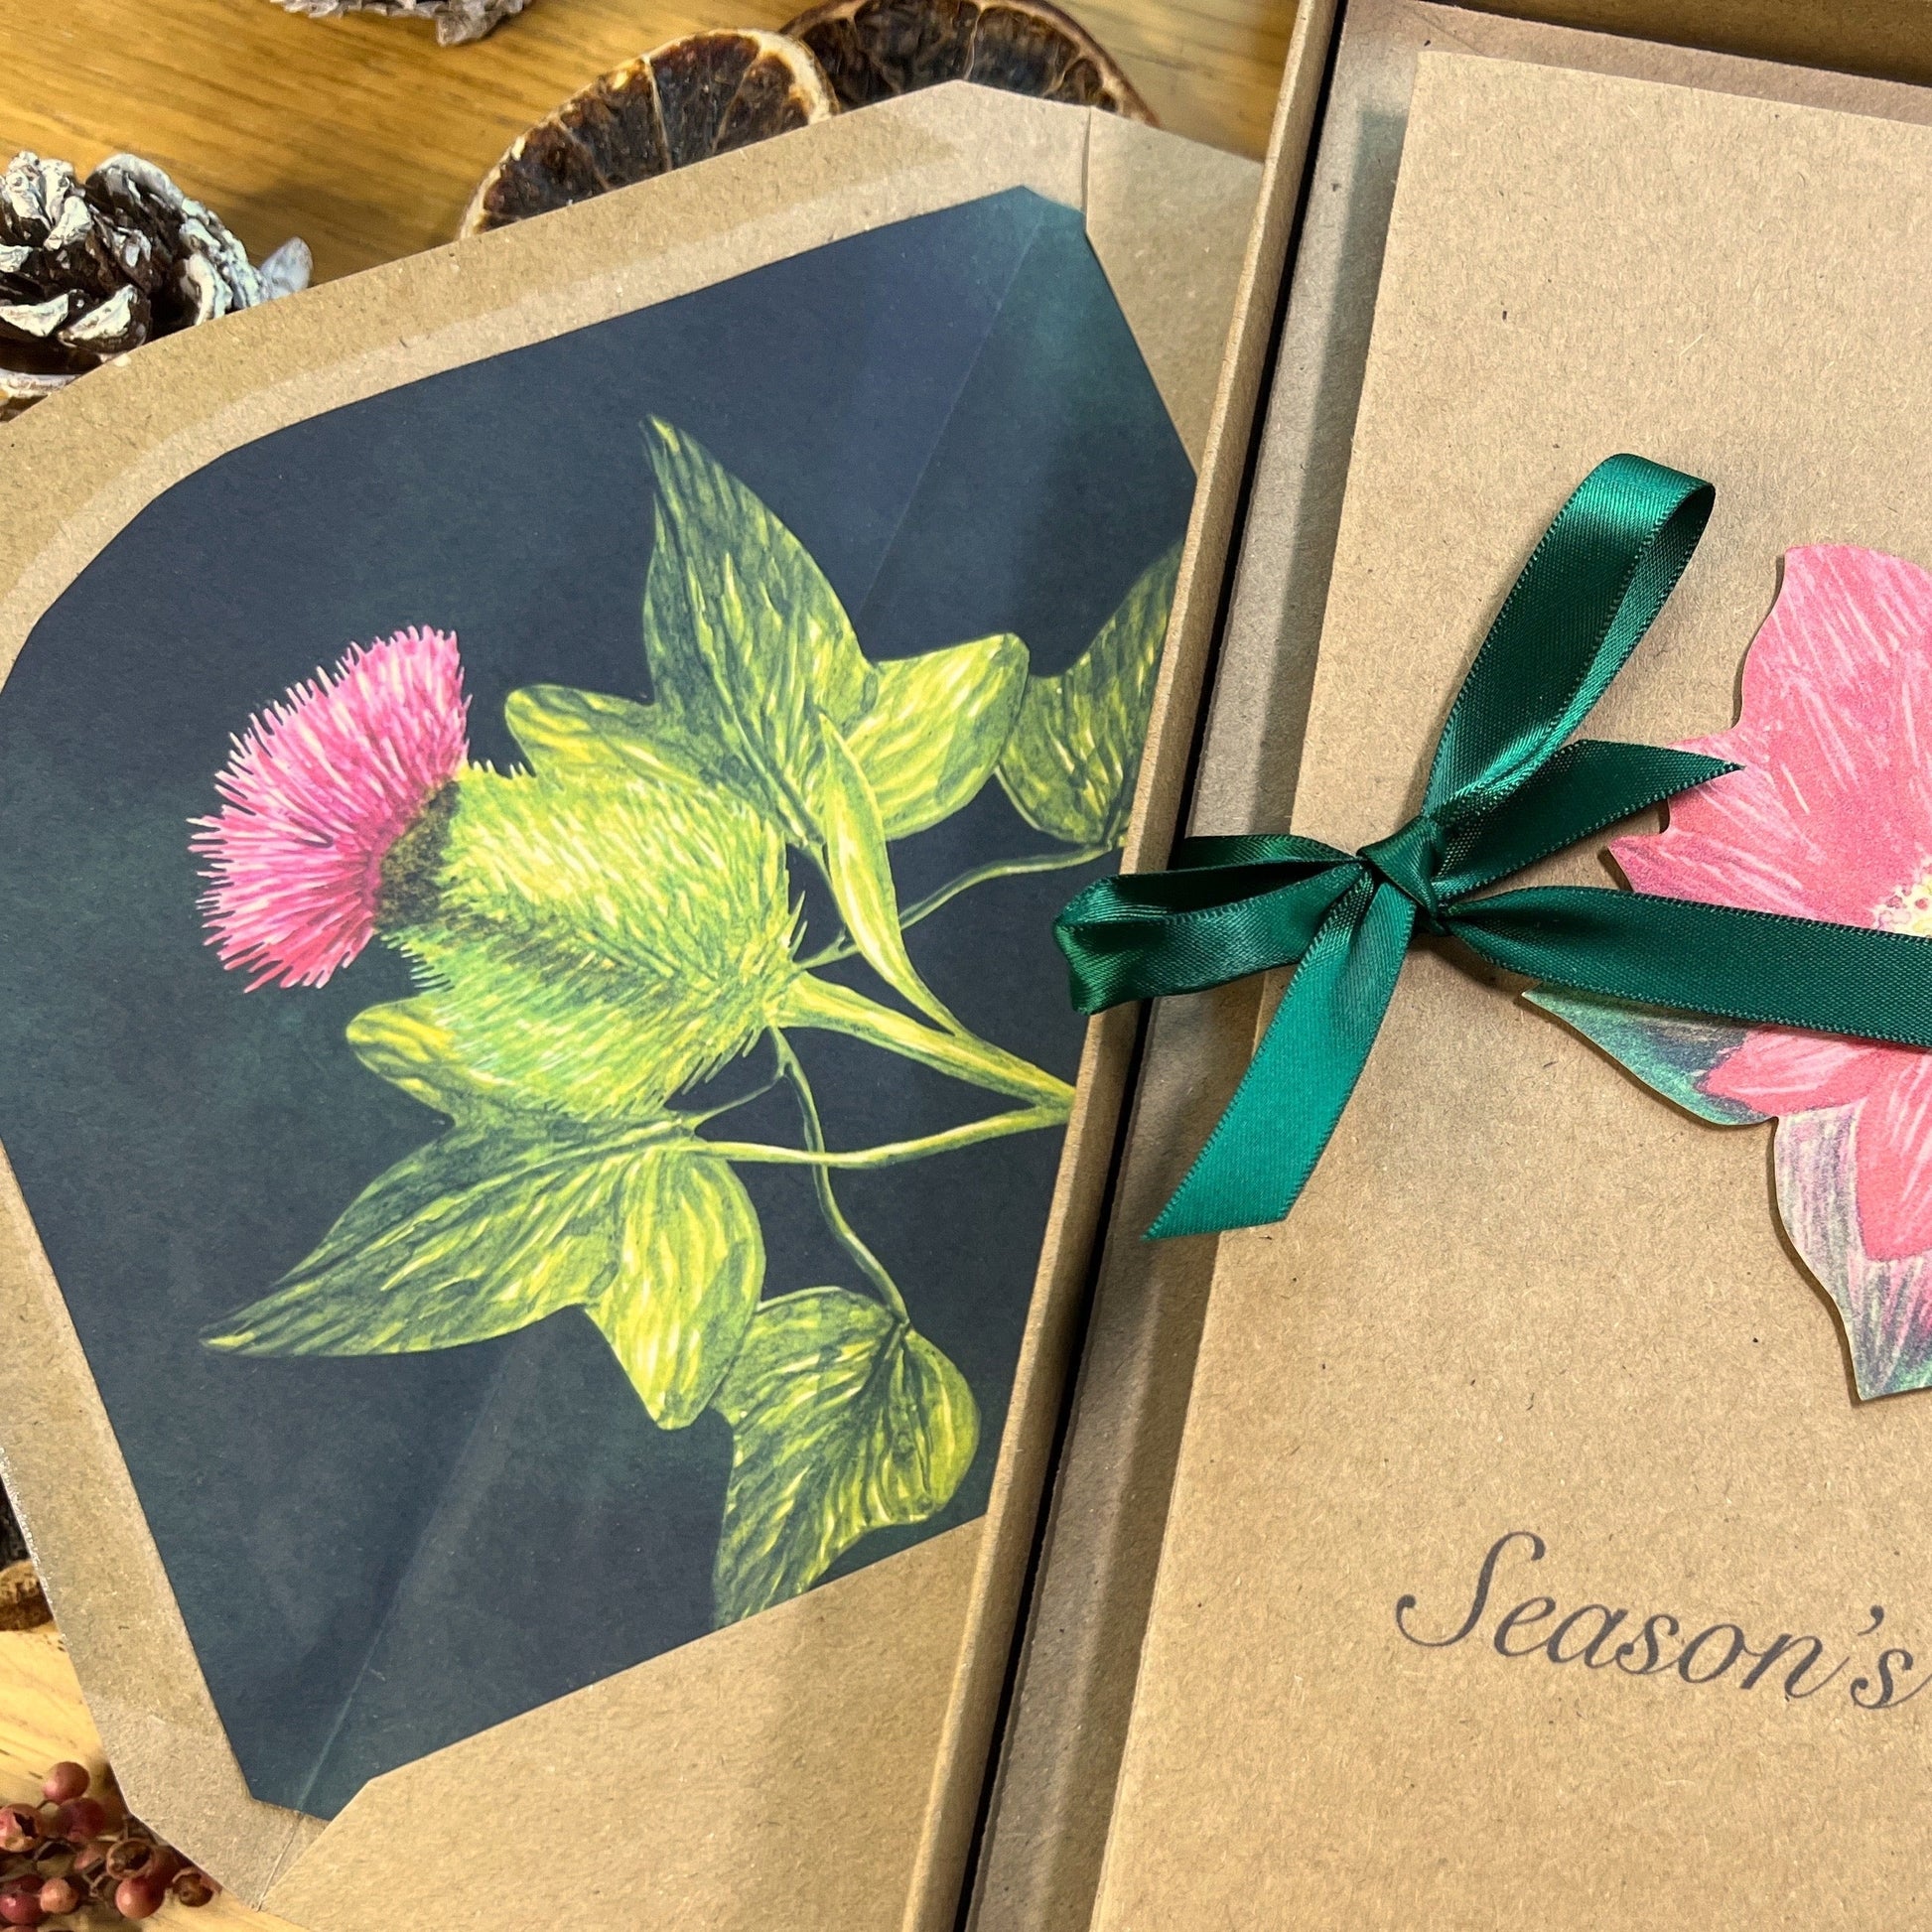 Winter evergreen themed botanical greetings card set with accompanying illustrated envelope